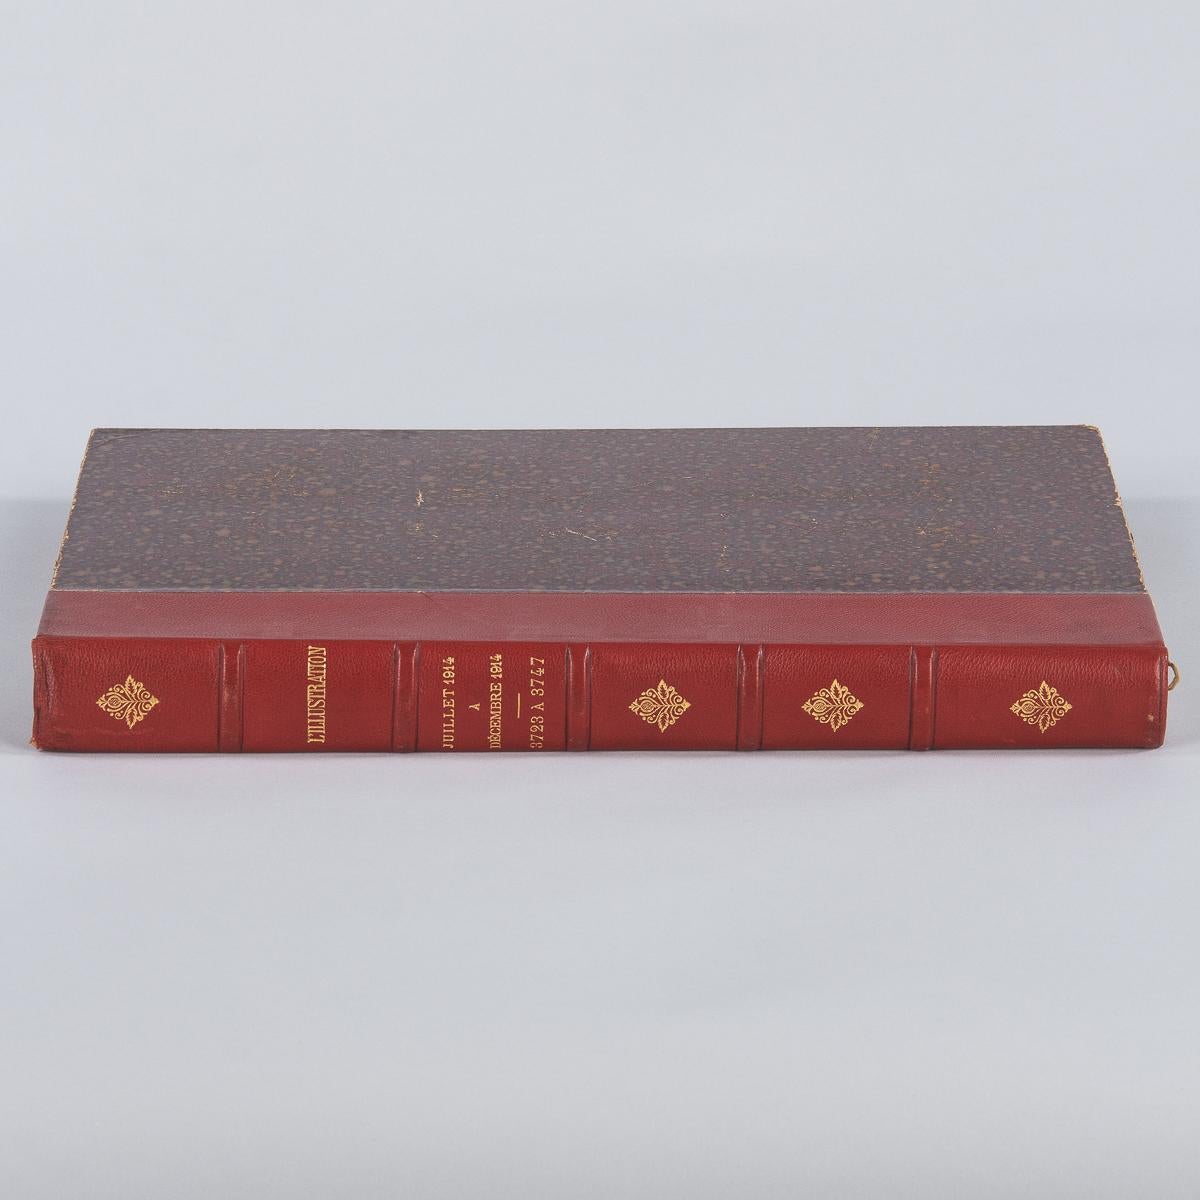 World War One Illustrated French Leather Bound Books, 1914-1918 6